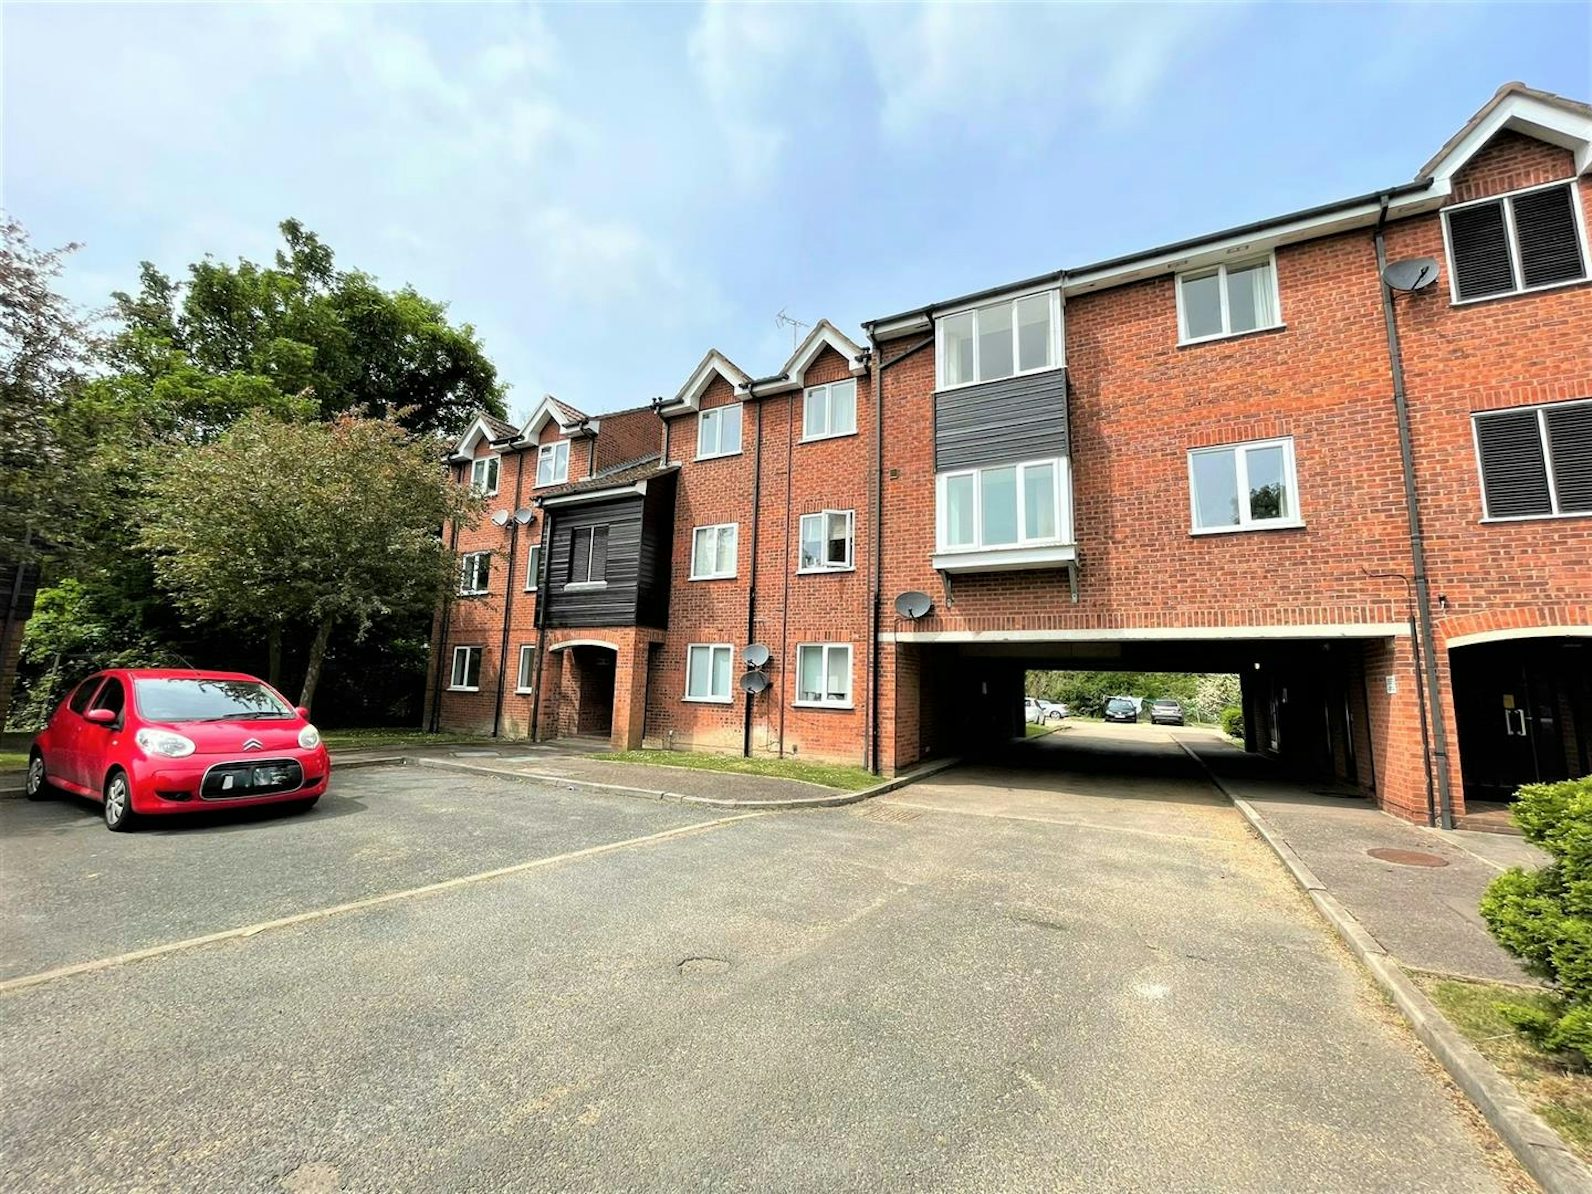 Flat for sale on Millstream Close Hitchin, SG4